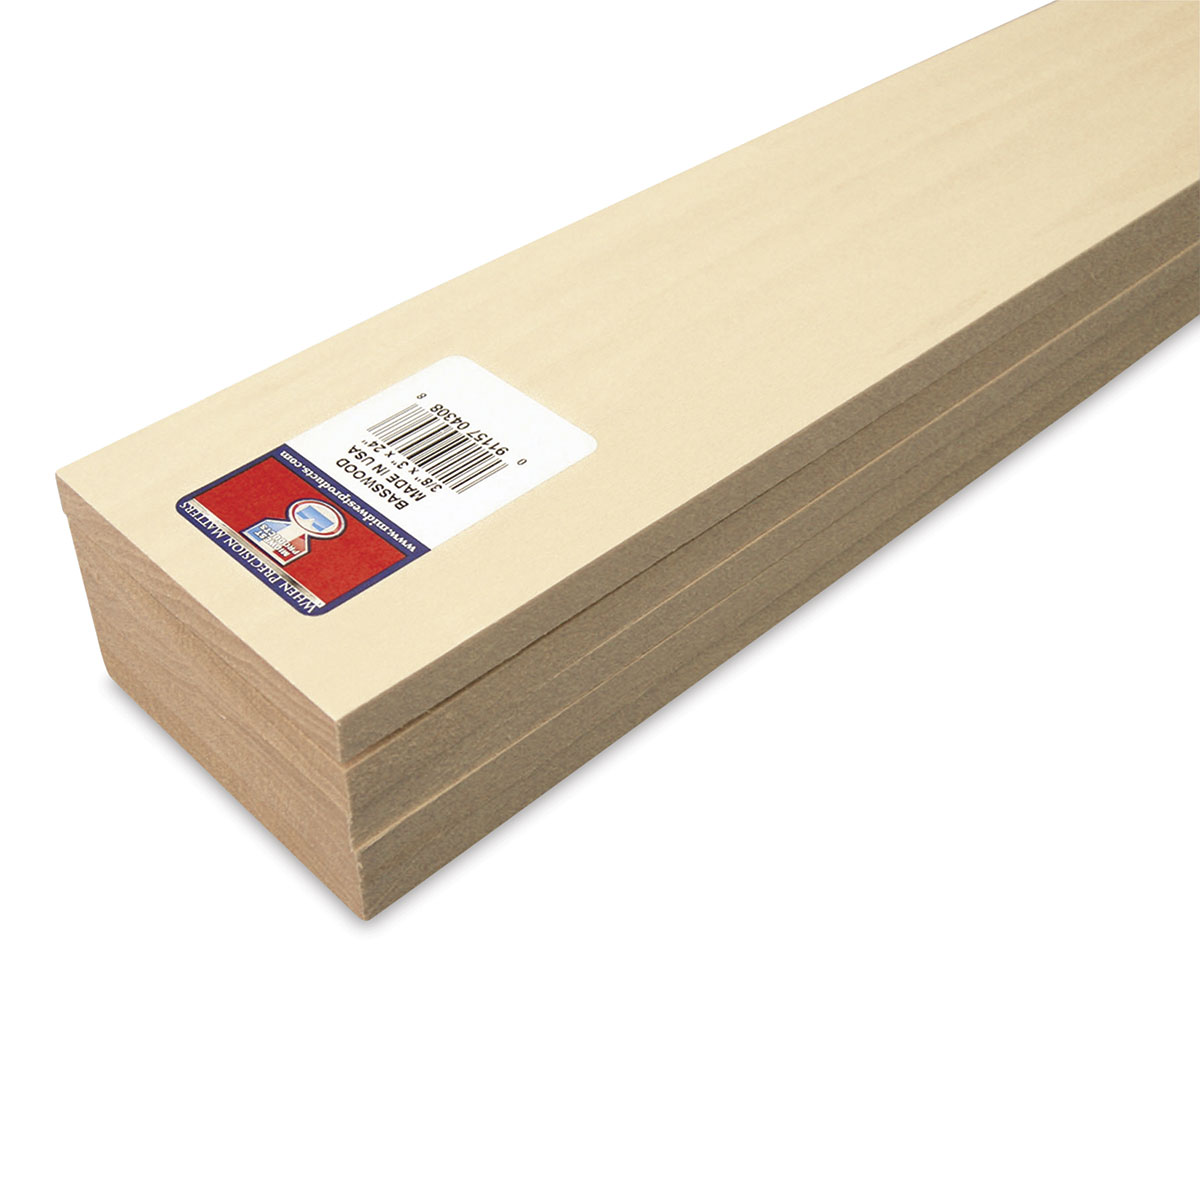 Midwest Basswood Sheets 1/8x2x24 (15) [MID4113] - AMain Hobbies